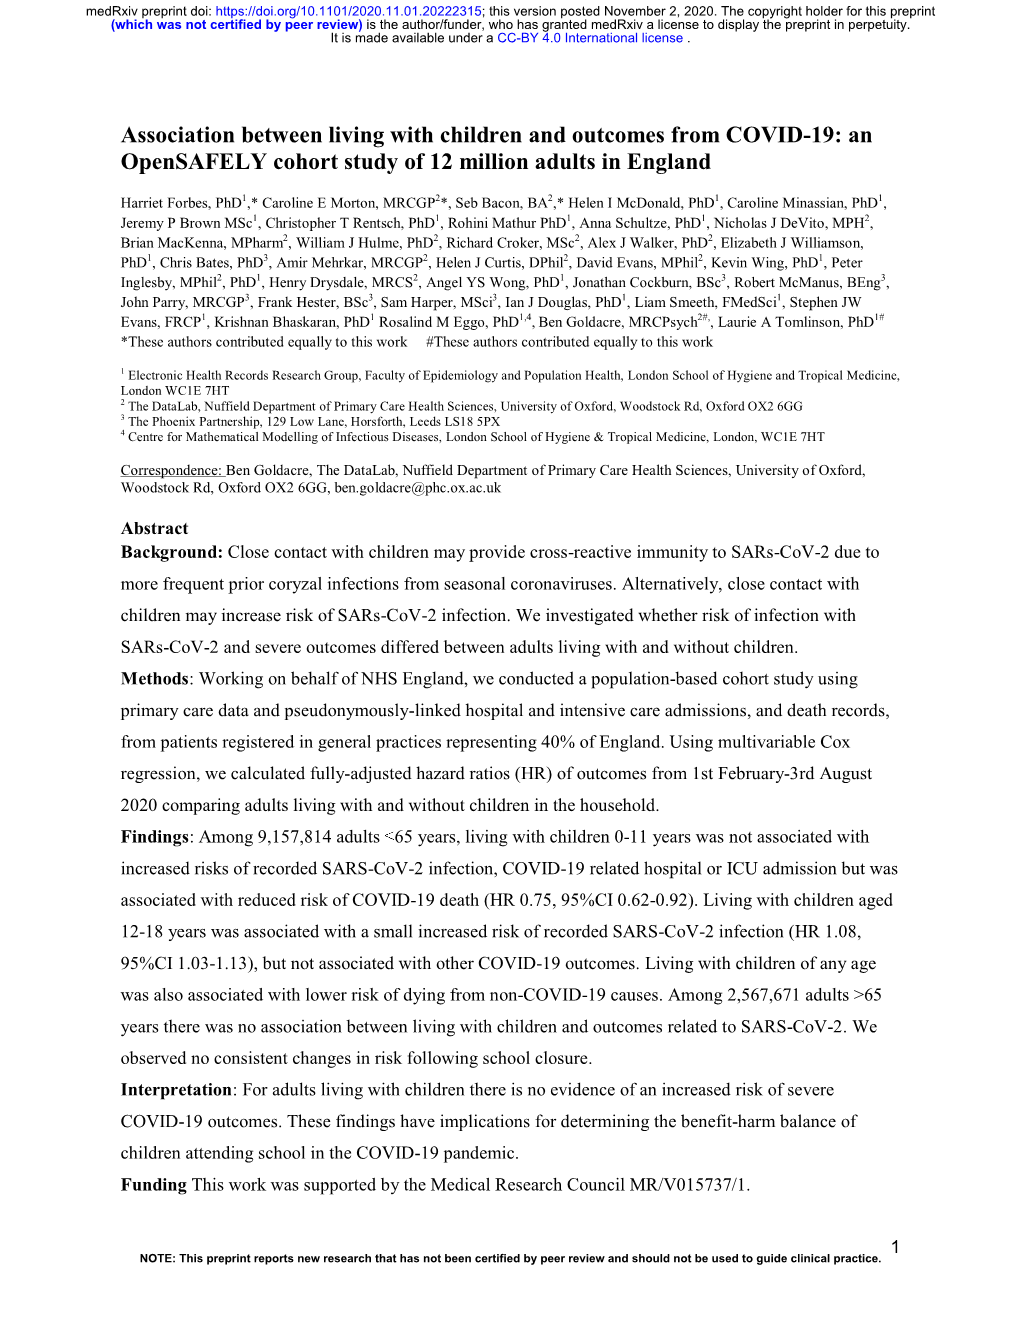 Association Between Living with Children and Outcomes from COVID-19: an Opensafely Cohort Study of 12 Million Adults in England